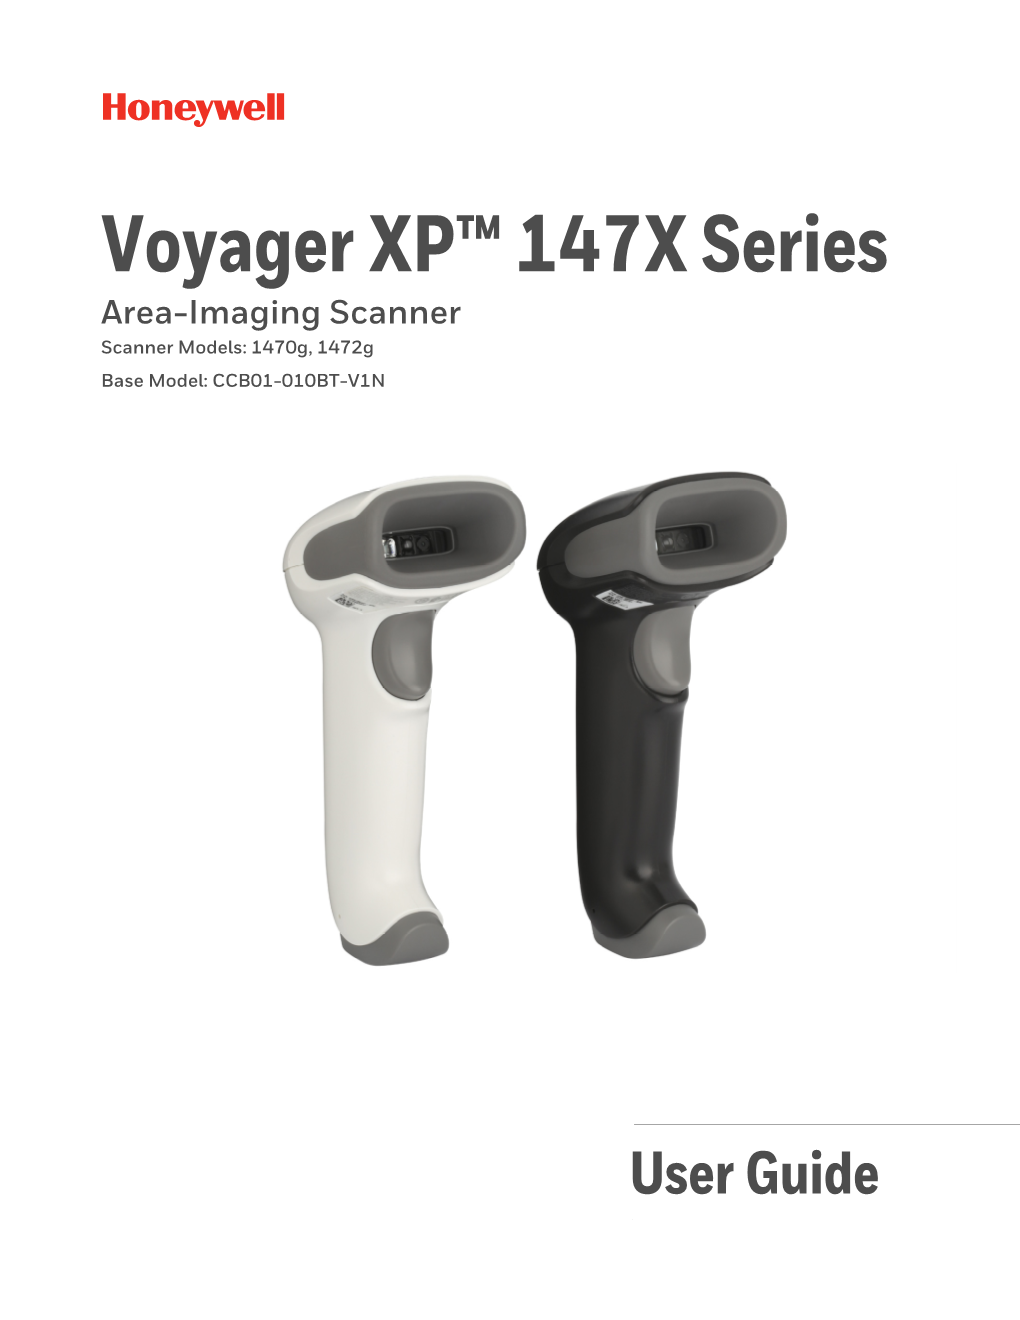 Voyager XP 1470G/1472G Series Area-Imaging Scanner User's Guide